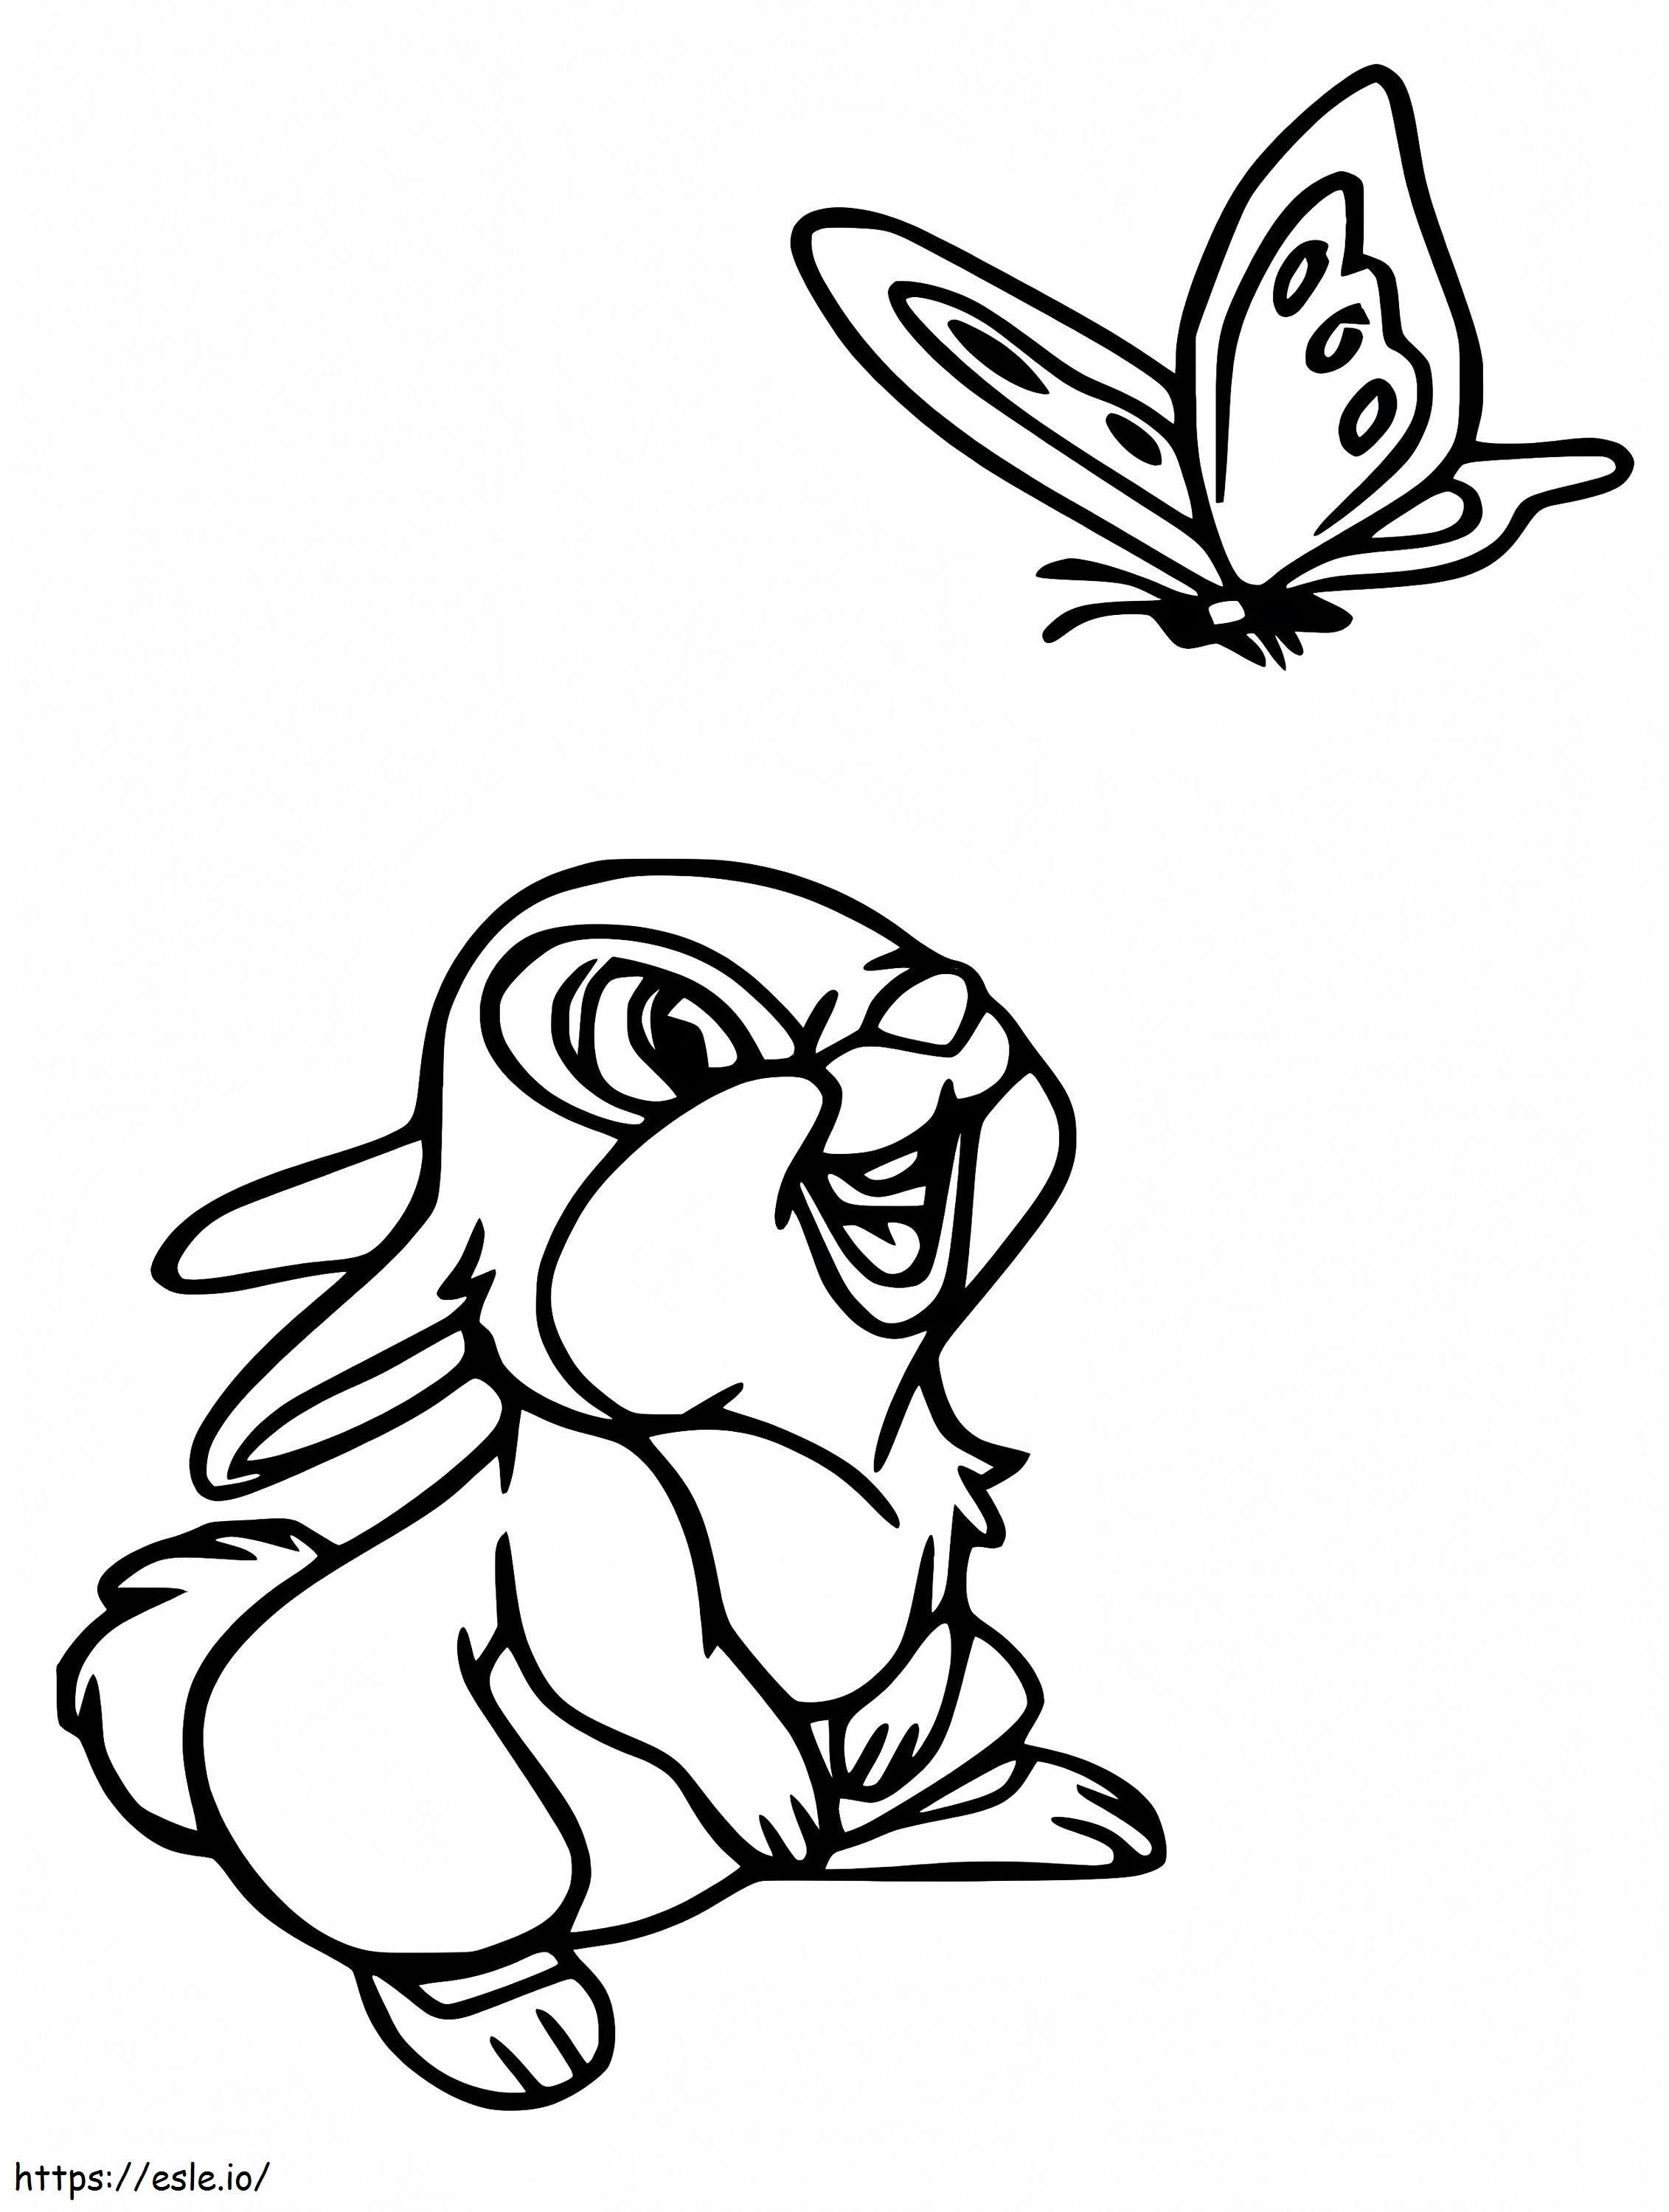 Thumper And Butterfly coloring page